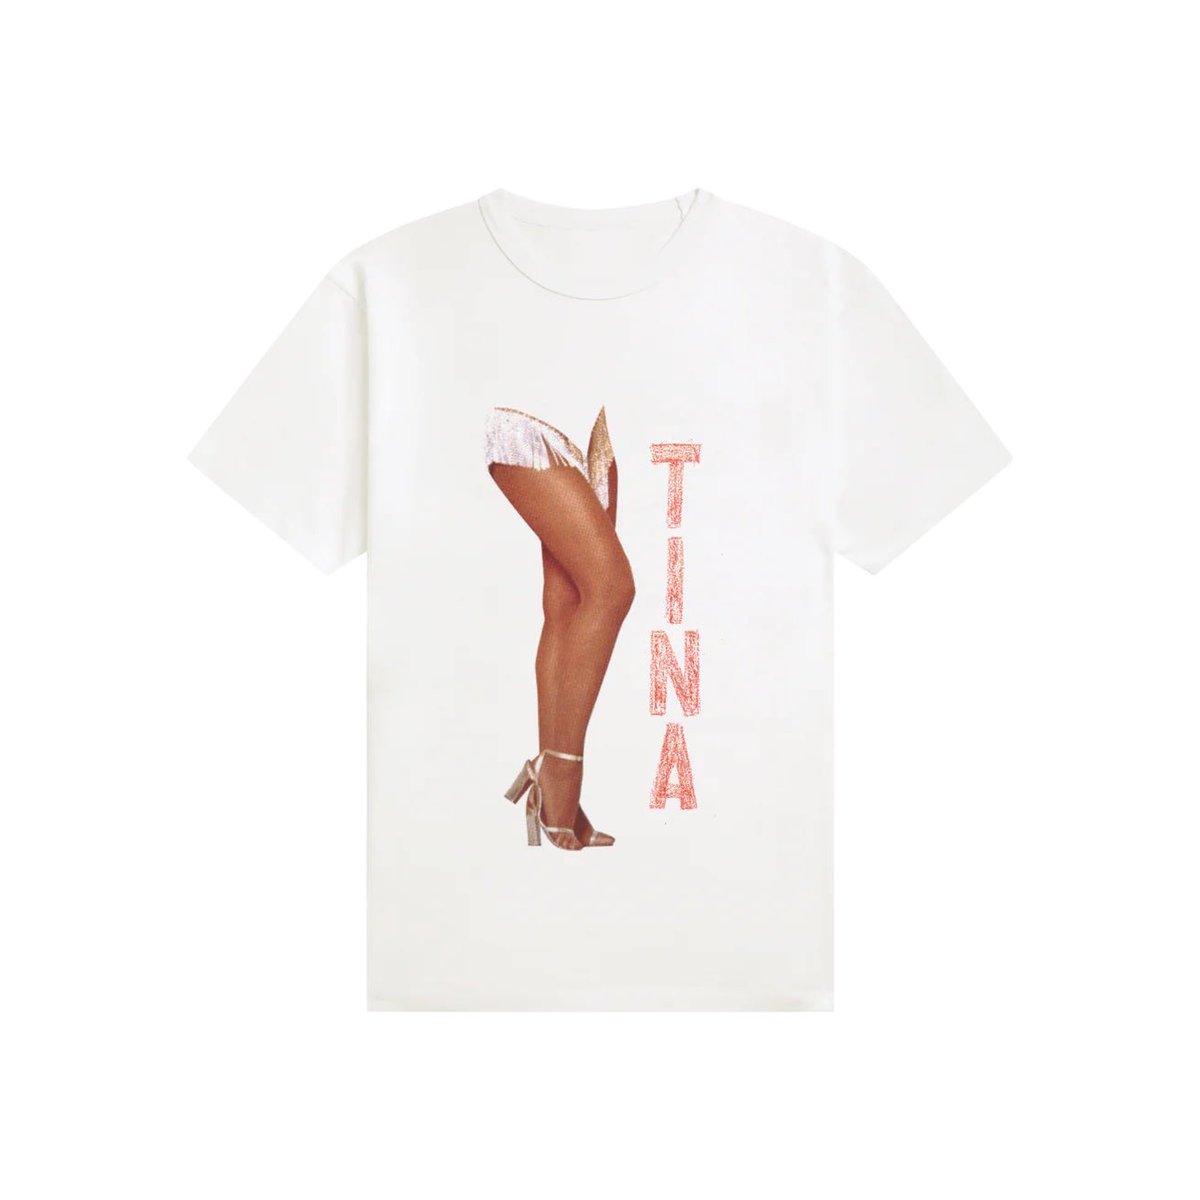 Get the T-shirt to match the new single release of ‘Legs’ here thetinaturner.com/collections/ap…